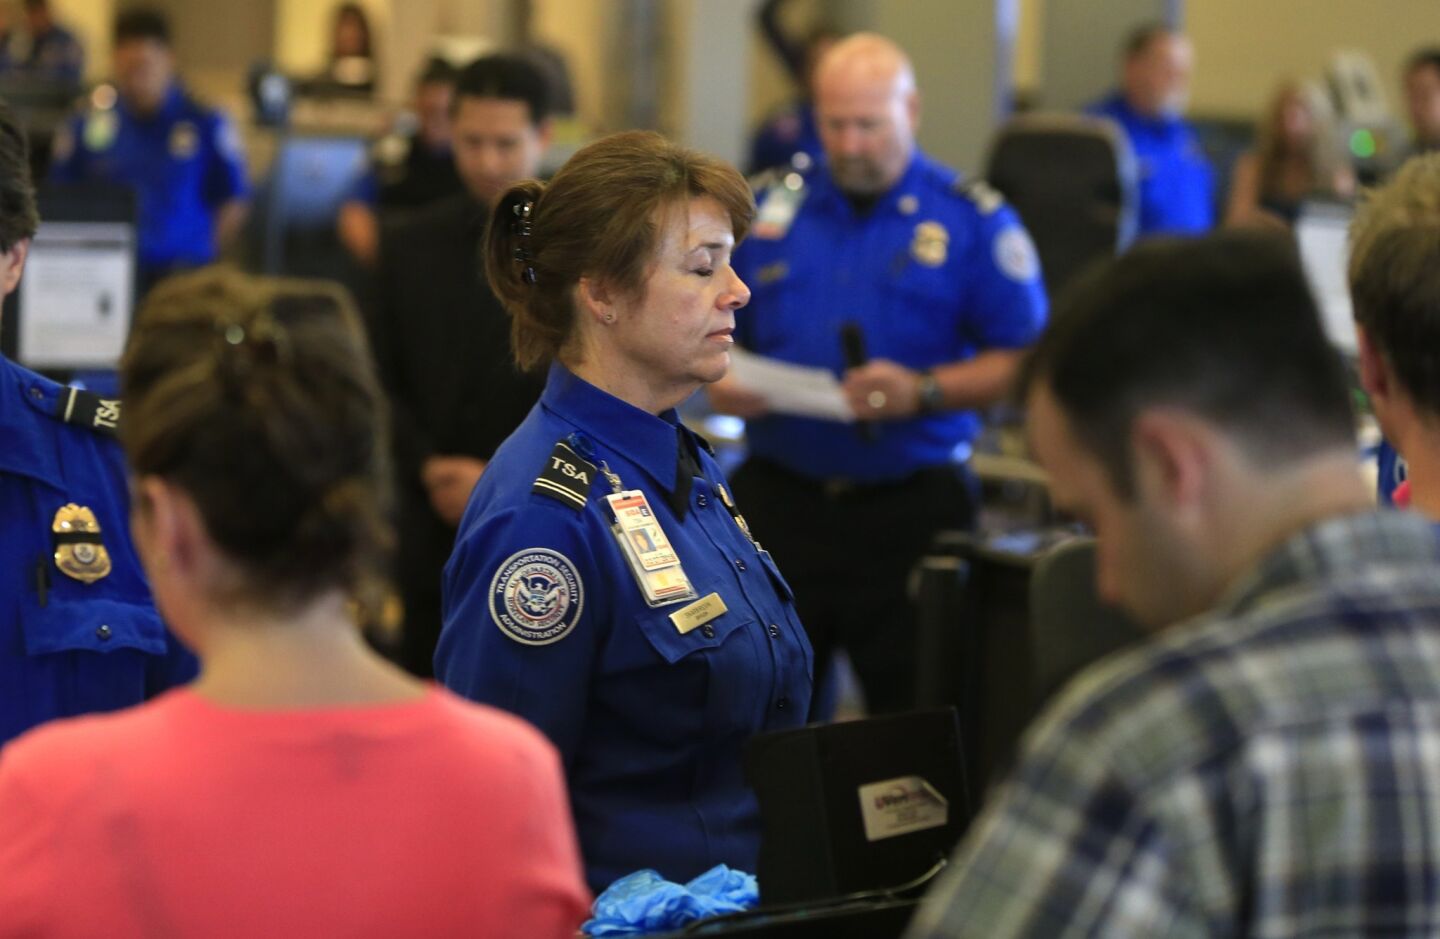 Transportation Security Administration employees observe a moment of silence on Friday at 9:20 a.m., the same time of last Friday's shooting that left TSA Officer Gerardo Hernandez dead.